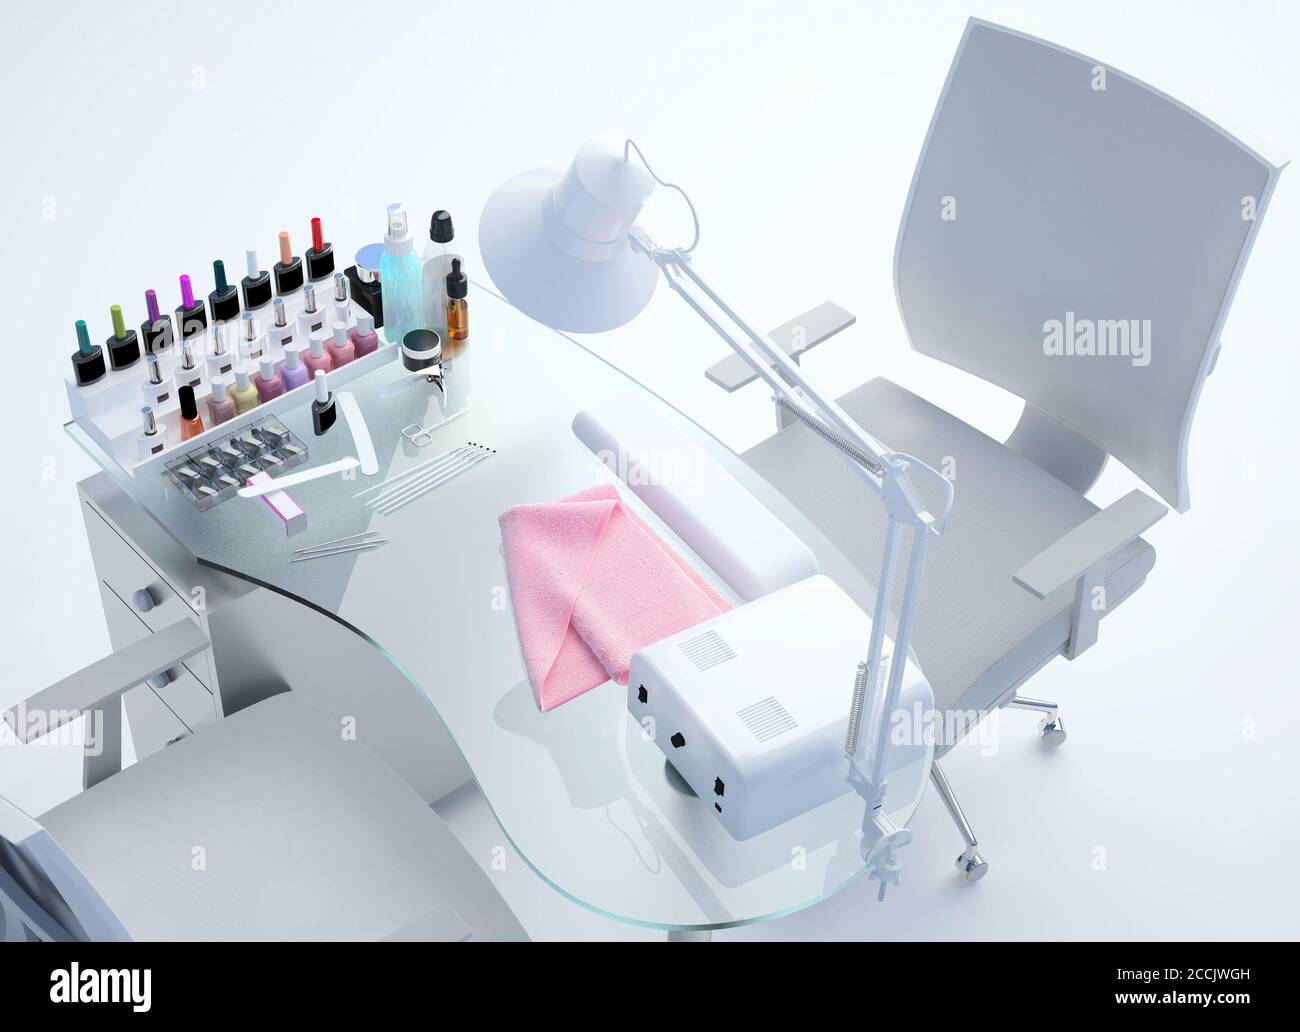 Nail care. Manicure table in salon. Set of professional manicure tools.  Beauty care Stock Photo - Alamy